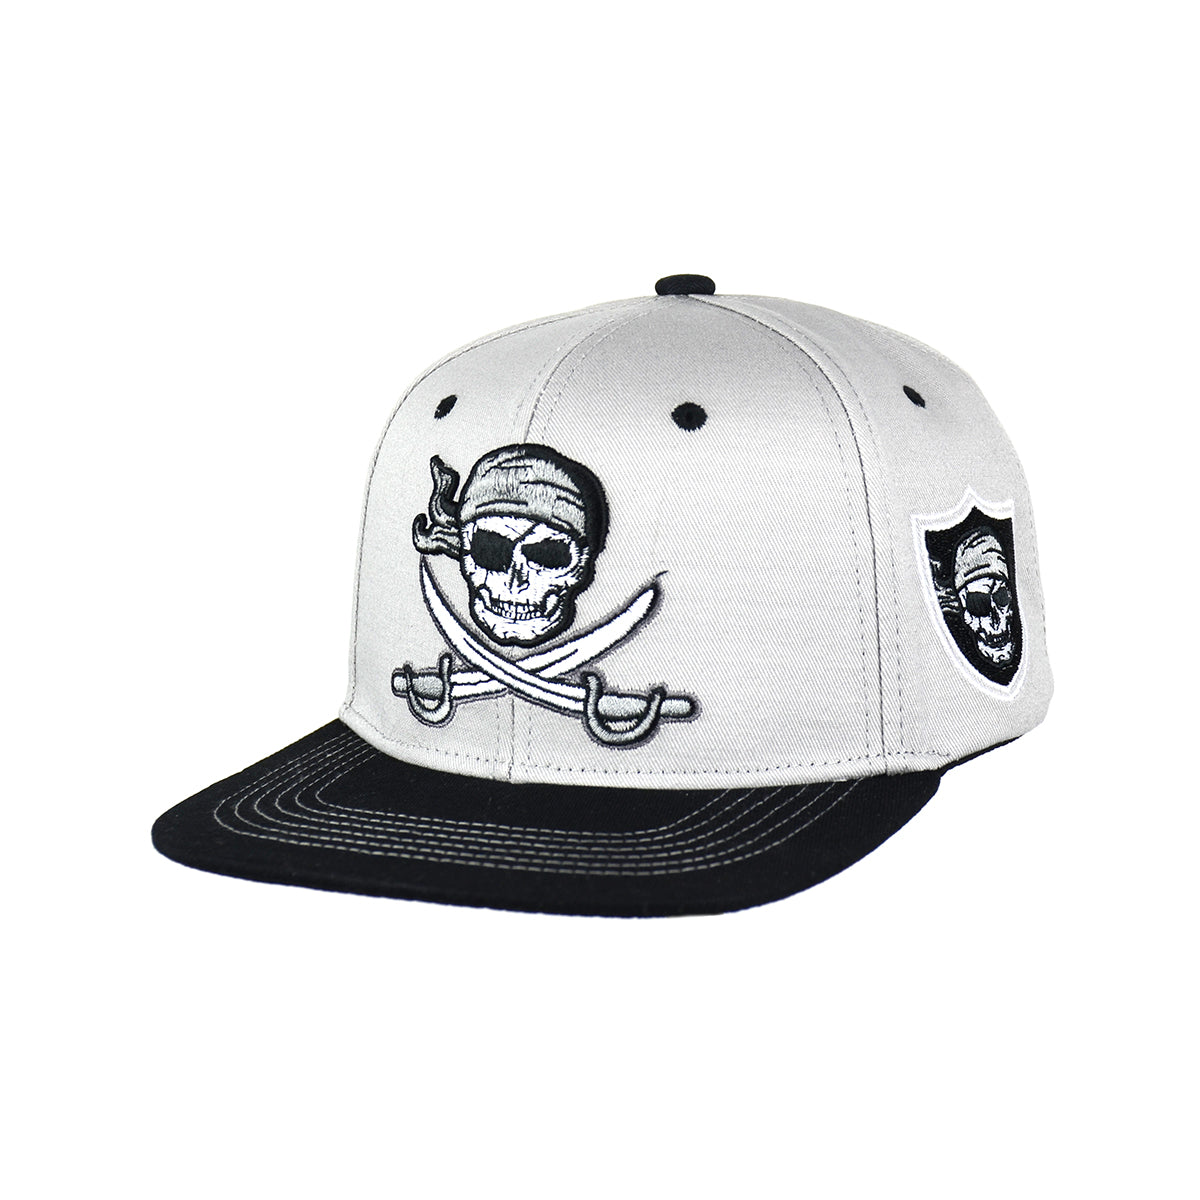 Snapback "Skull Pirate" Hat Embroidered